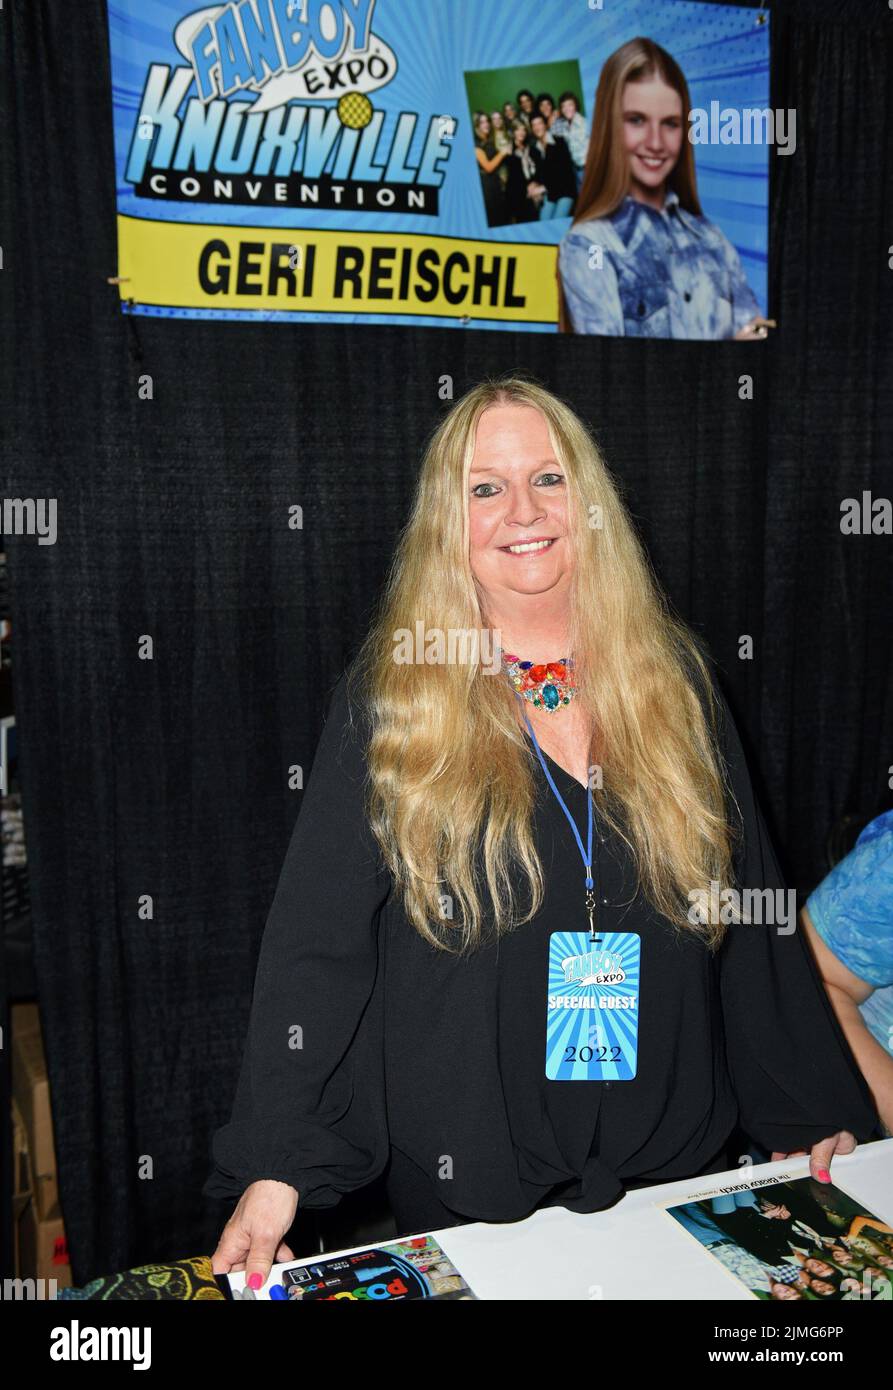 Knoxville, TN, USA. 5th Aug, 2022. Geri Reischl in attendance for Fanboy Expo 2022, Knoxville Convention Center, Knoxville, TN August 5, 2022. Credit: Derek Storm/Everett Collection/Alamy Live News Stock Photo